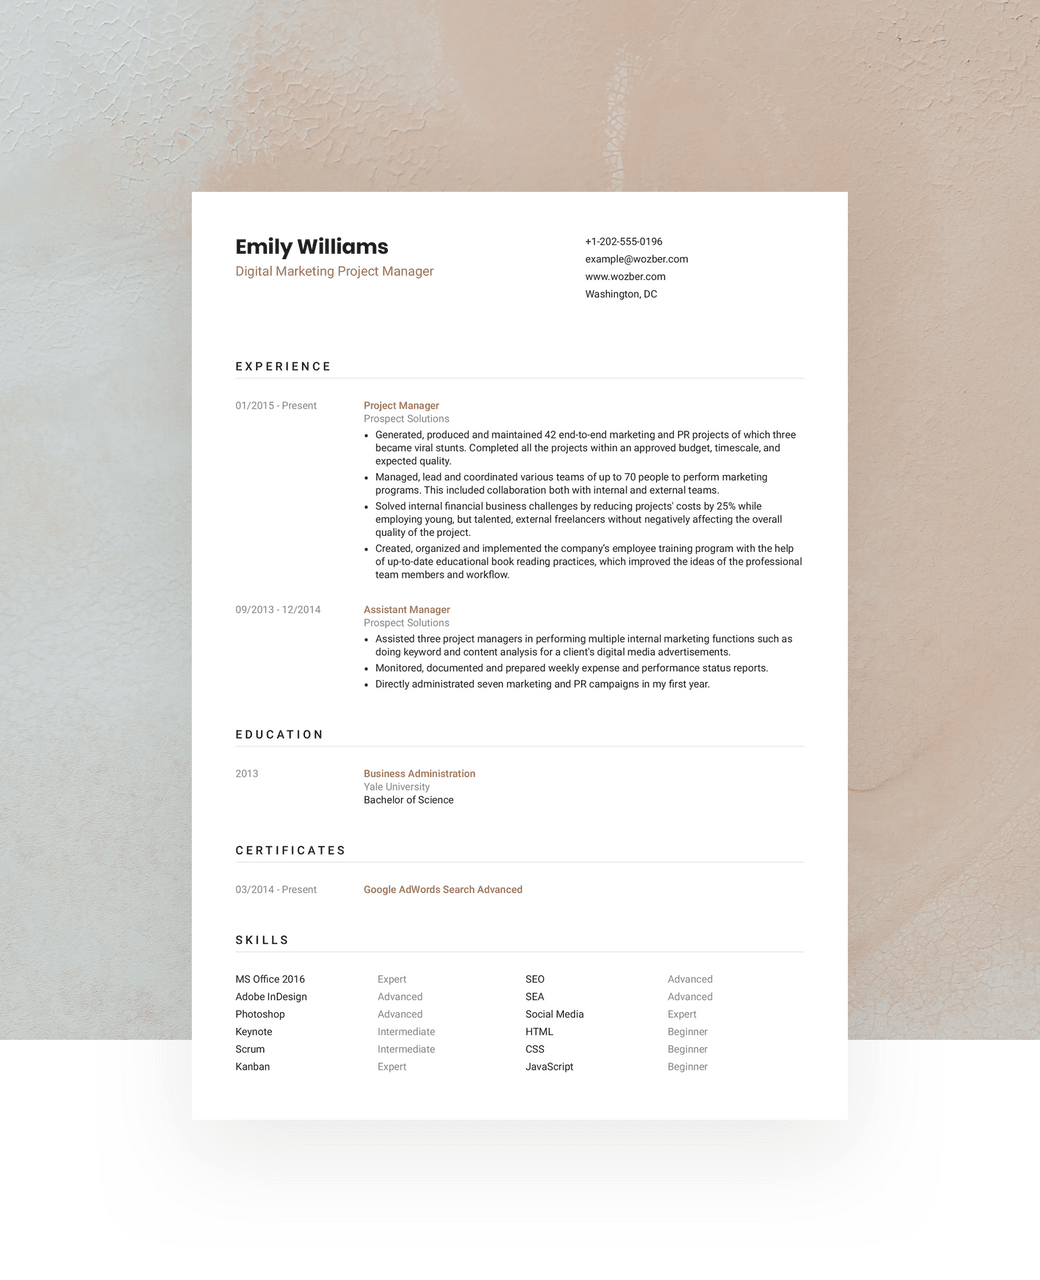 An ATS-friendly resume template with a classic, clean design.